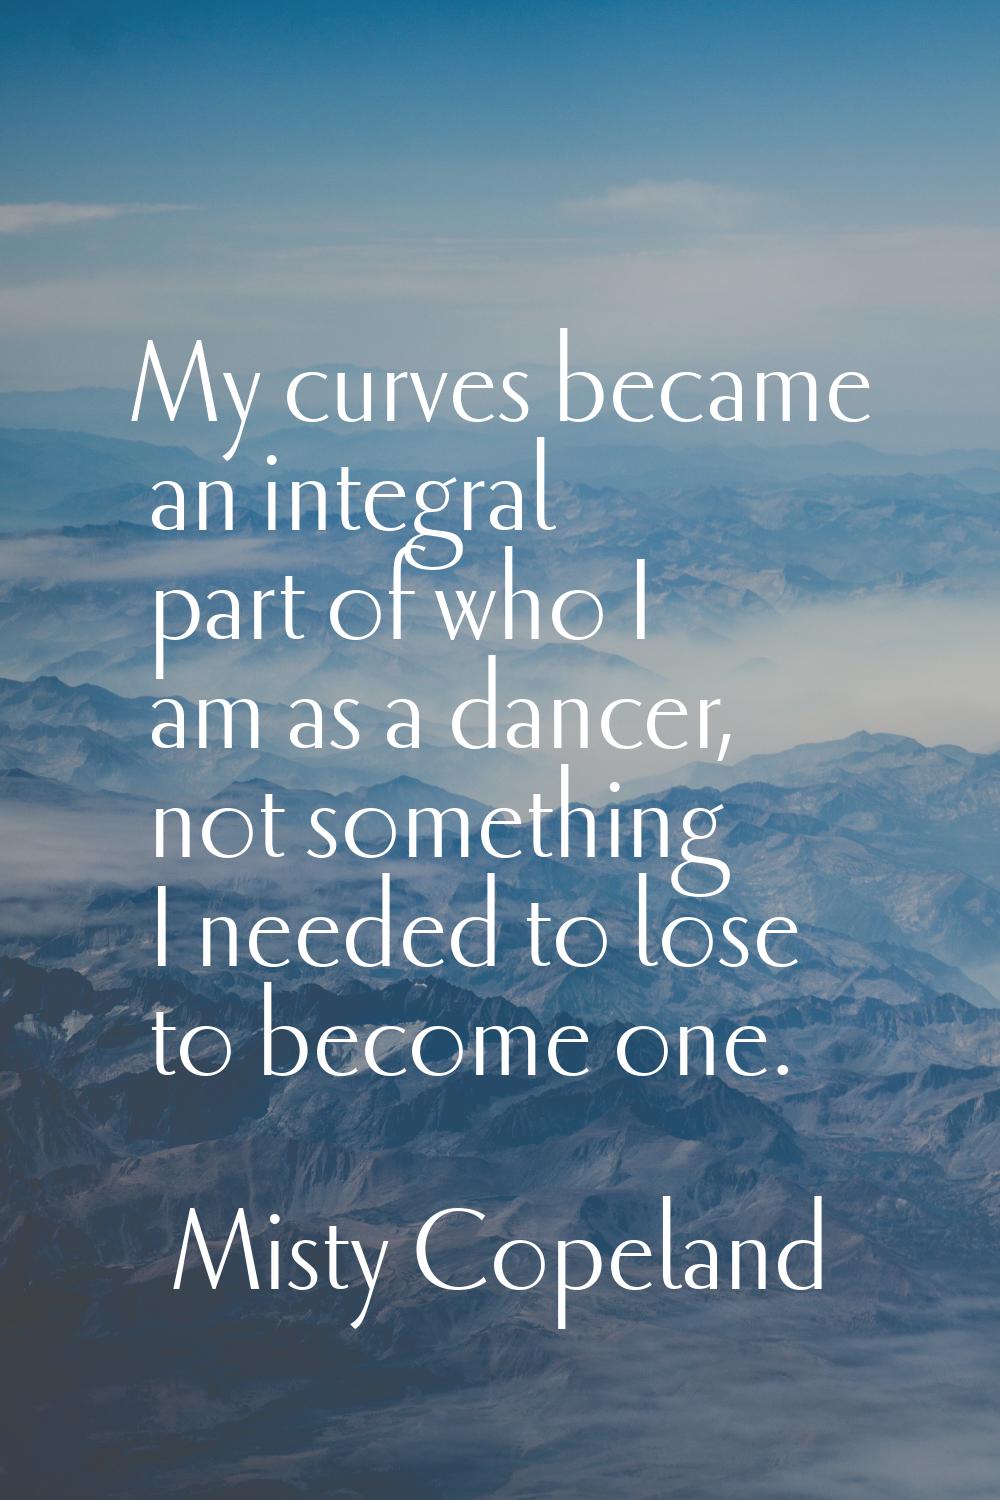 My curves became an integral part of who I am as a dancer, not something I needed to lose to become